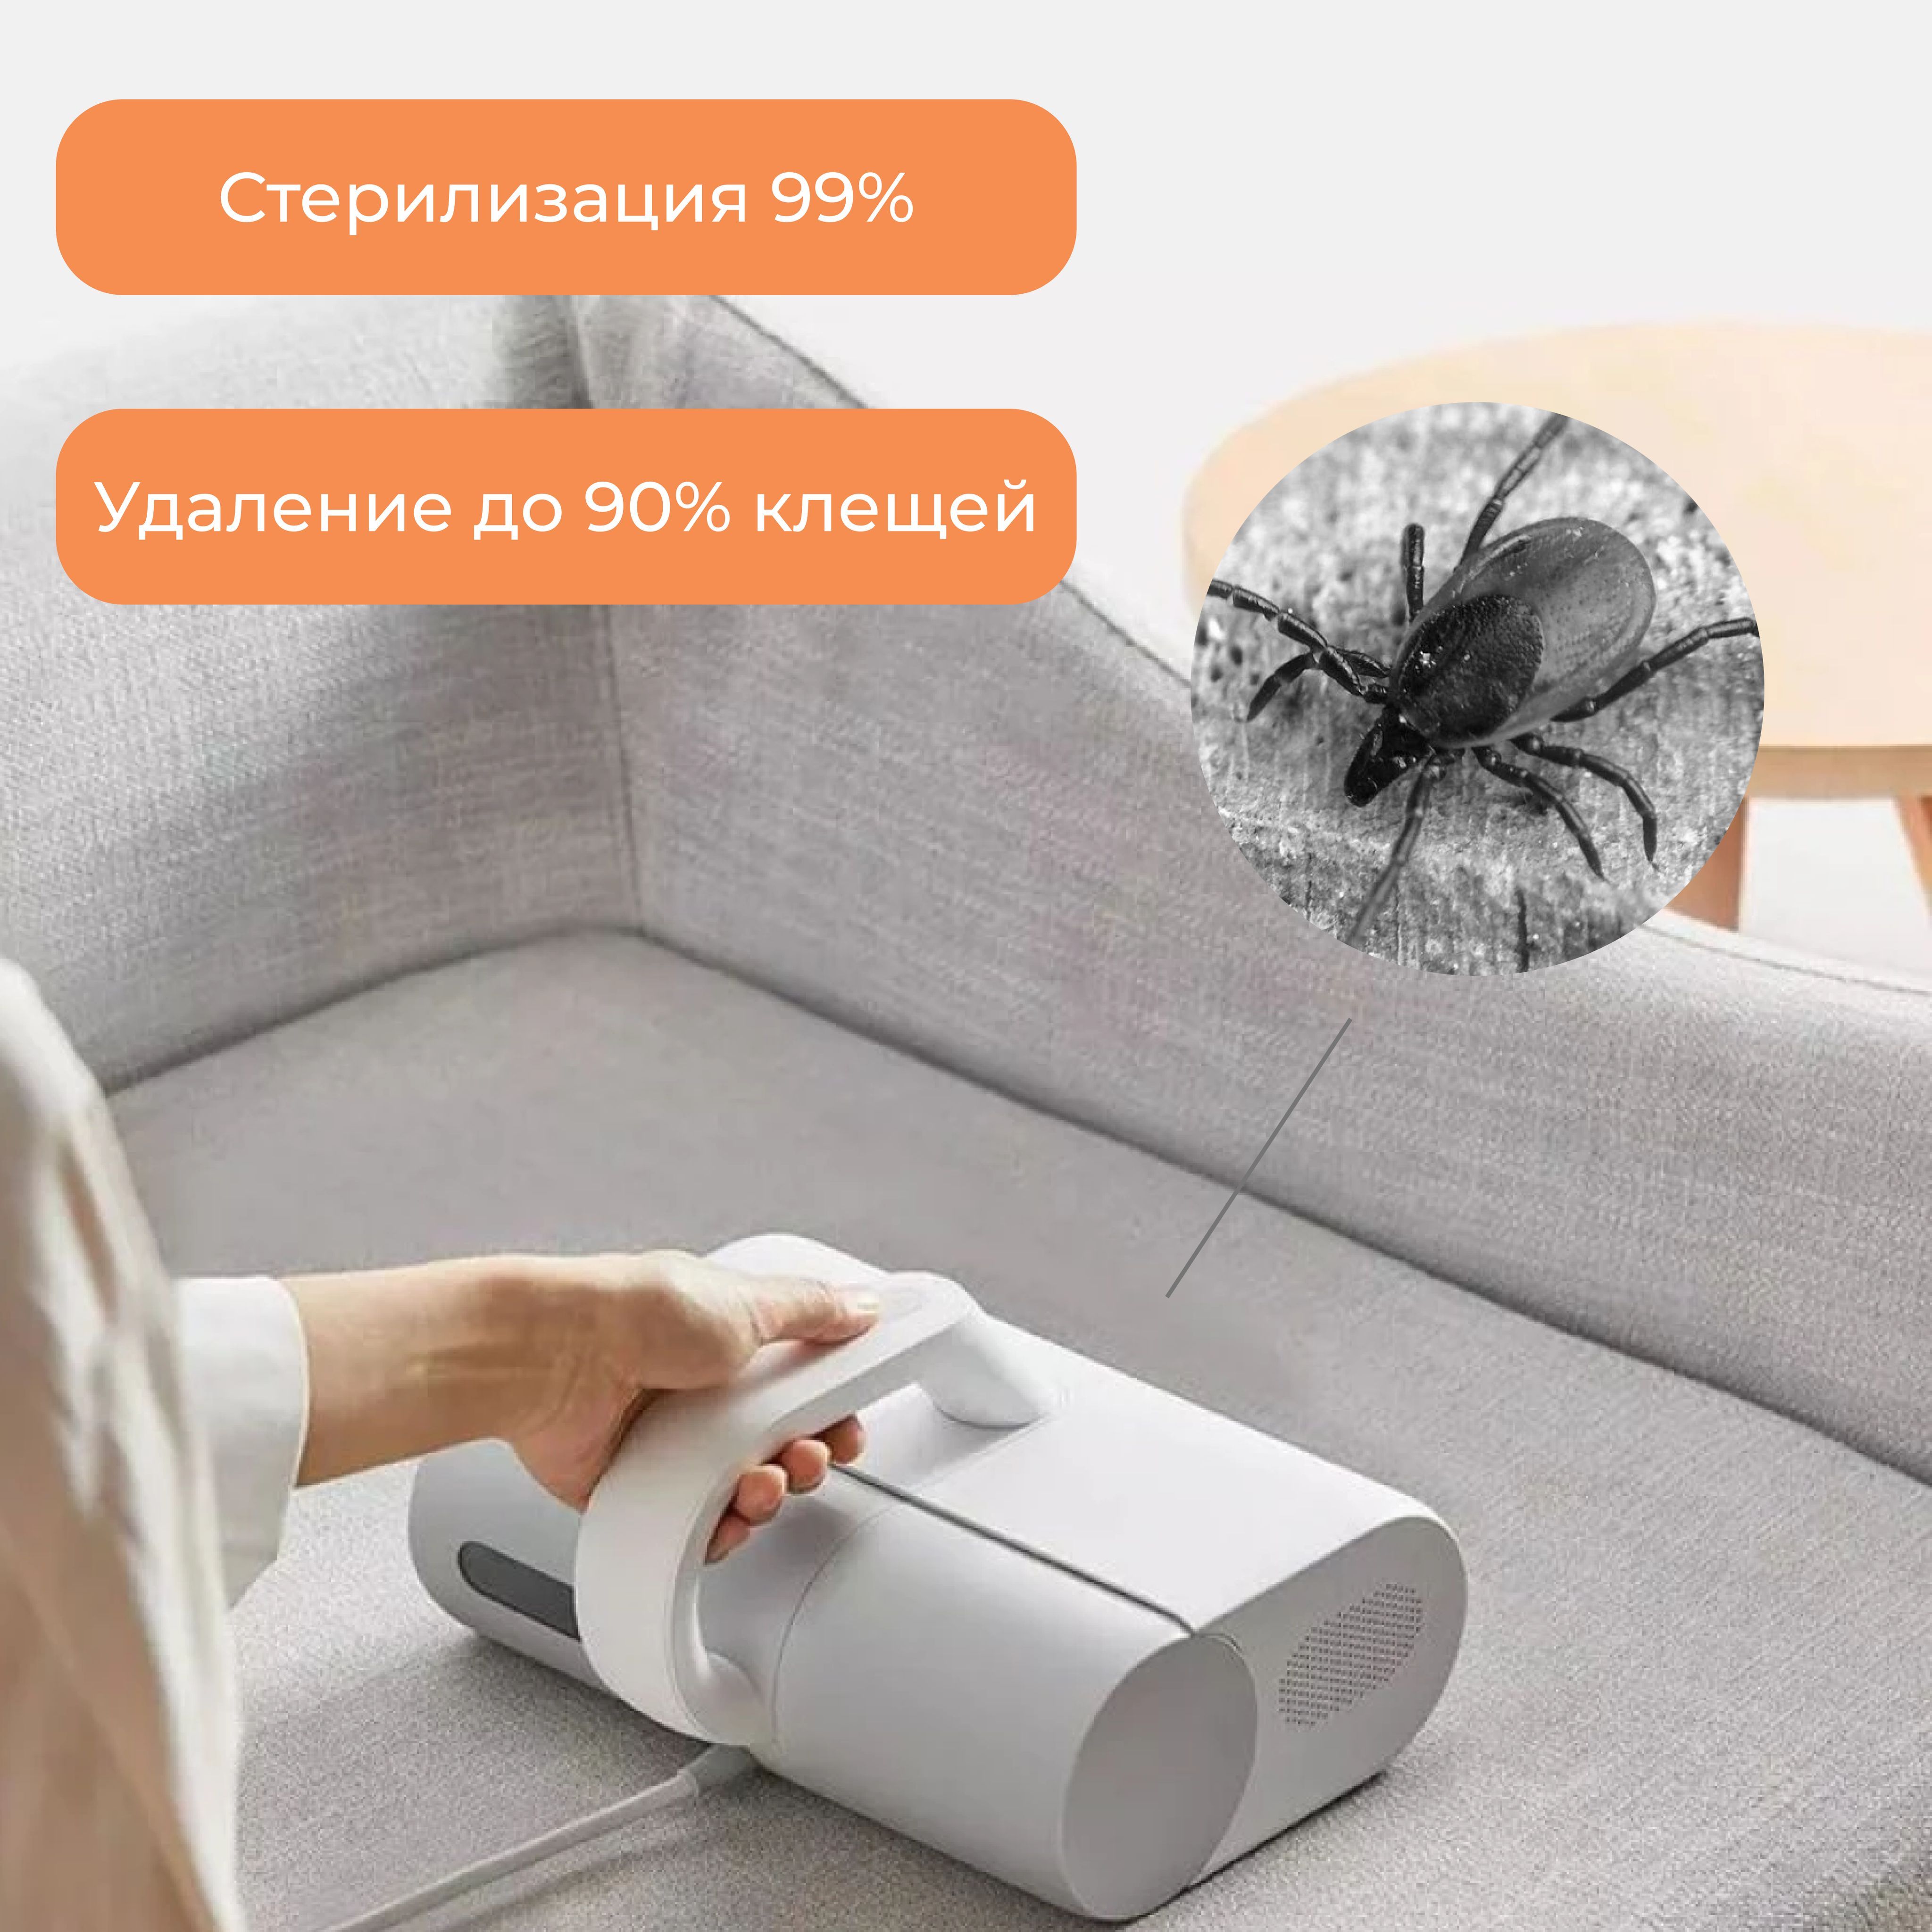 Cleaner mjcmy01dy. Пылесос Xiaomi (mjcmy01dy). Пылесос от пылевых клещей. Xiaomi Mijia Dust Mite Vacuum Cleaner. Xiaomi Dust Mite Vacuum Cleaner mjcmy01dy лампочка.